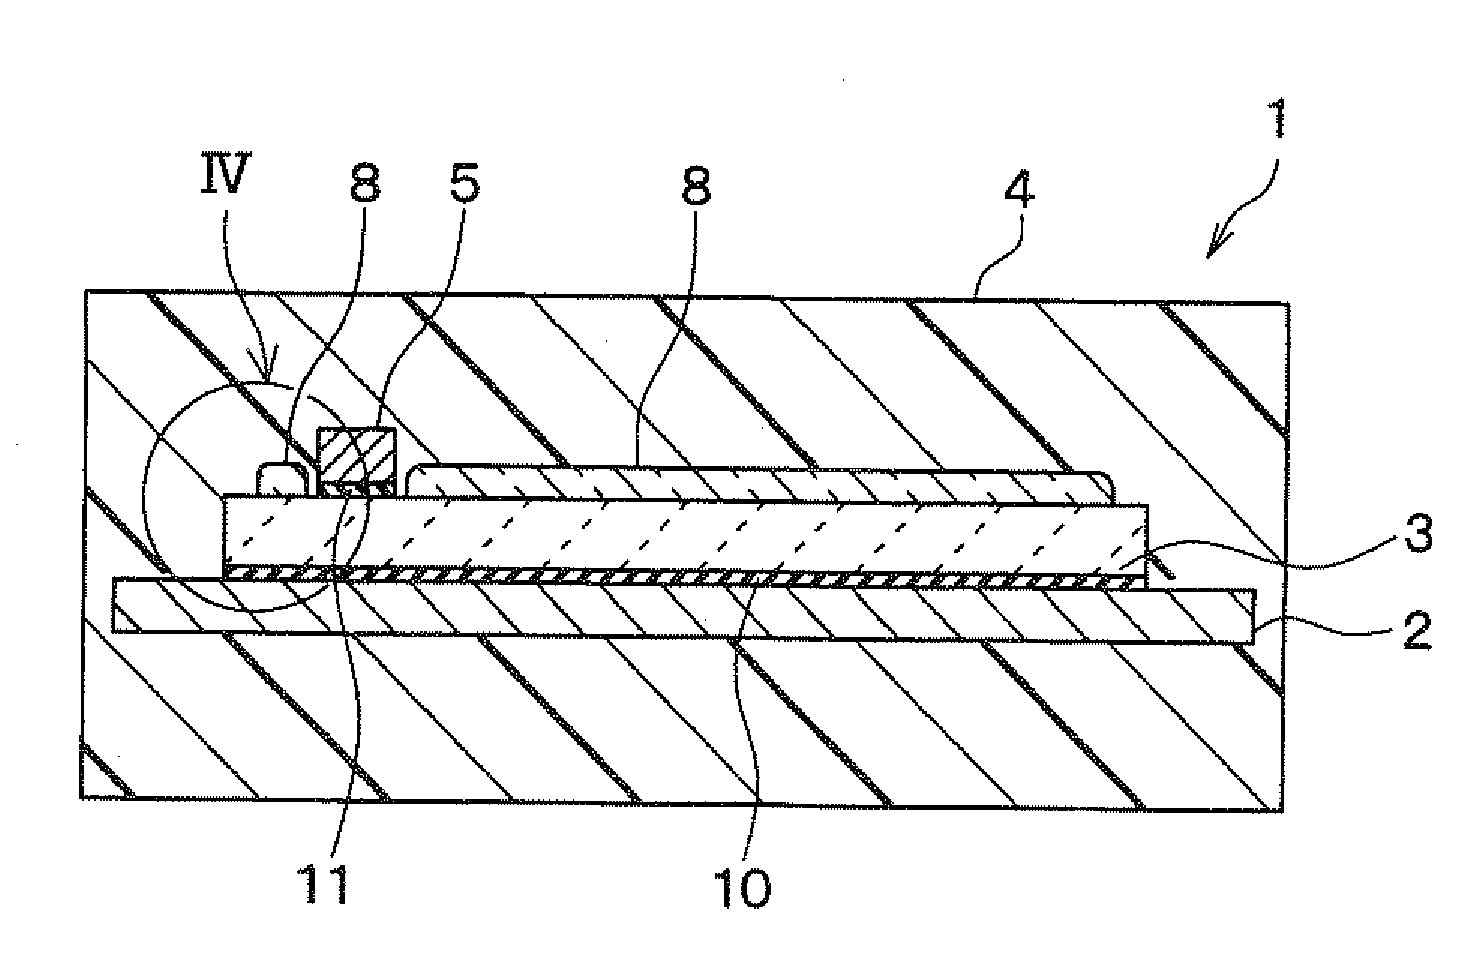 Resin molded semiconductor device